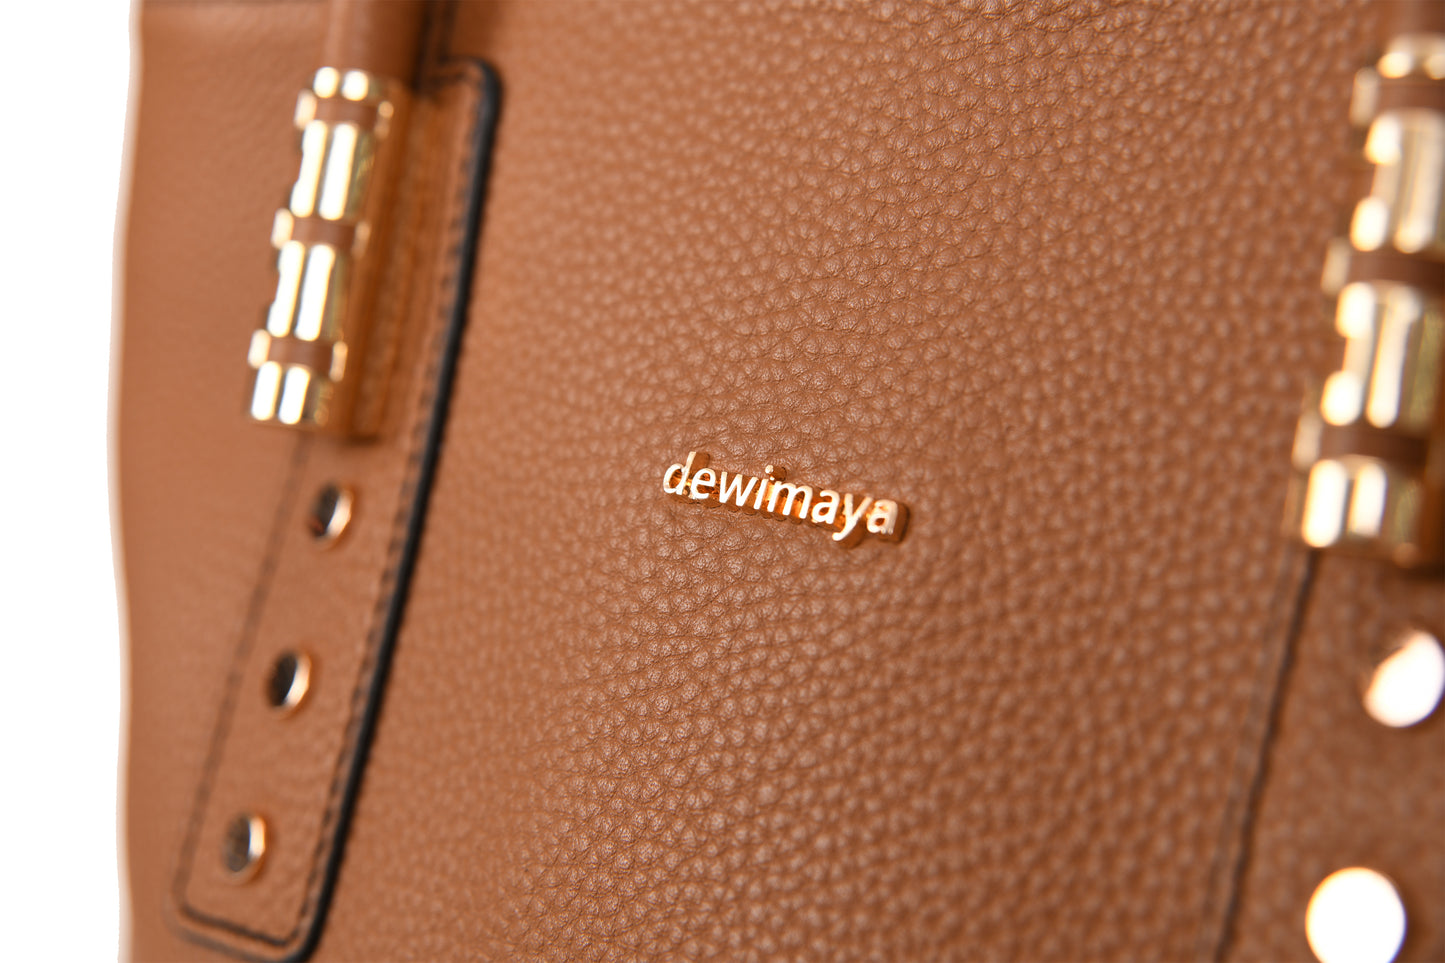 Ayana Brown Tan Pebble Grain Leather Large Handbag made by Dewi Maya gold logo available at the best boutique in Upstate South Carolina Spartanburg Greenville Dewi Maya Boutique